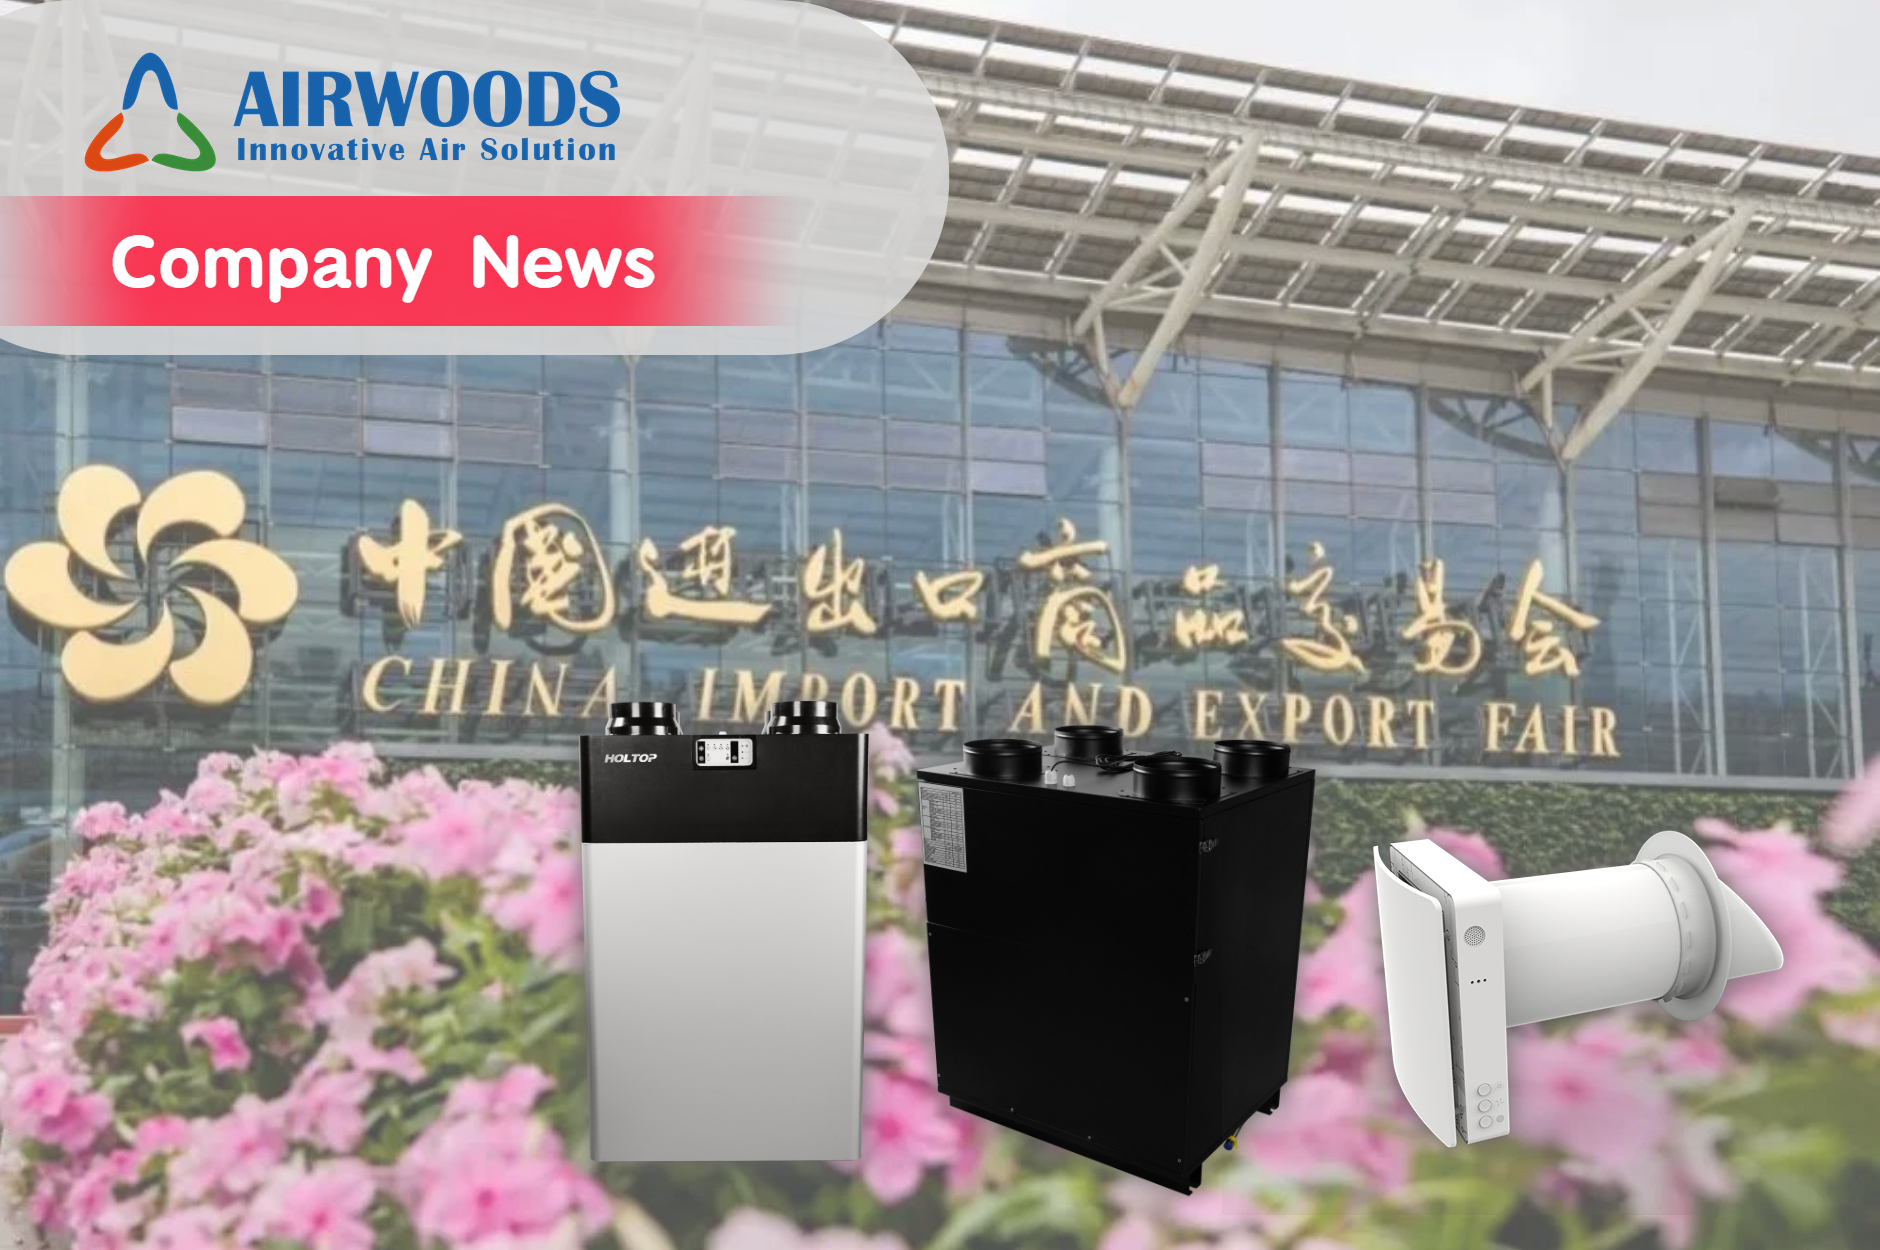 Airwoods Makes Debut at Canton Fair, Garnering Attention from Media and Buyers